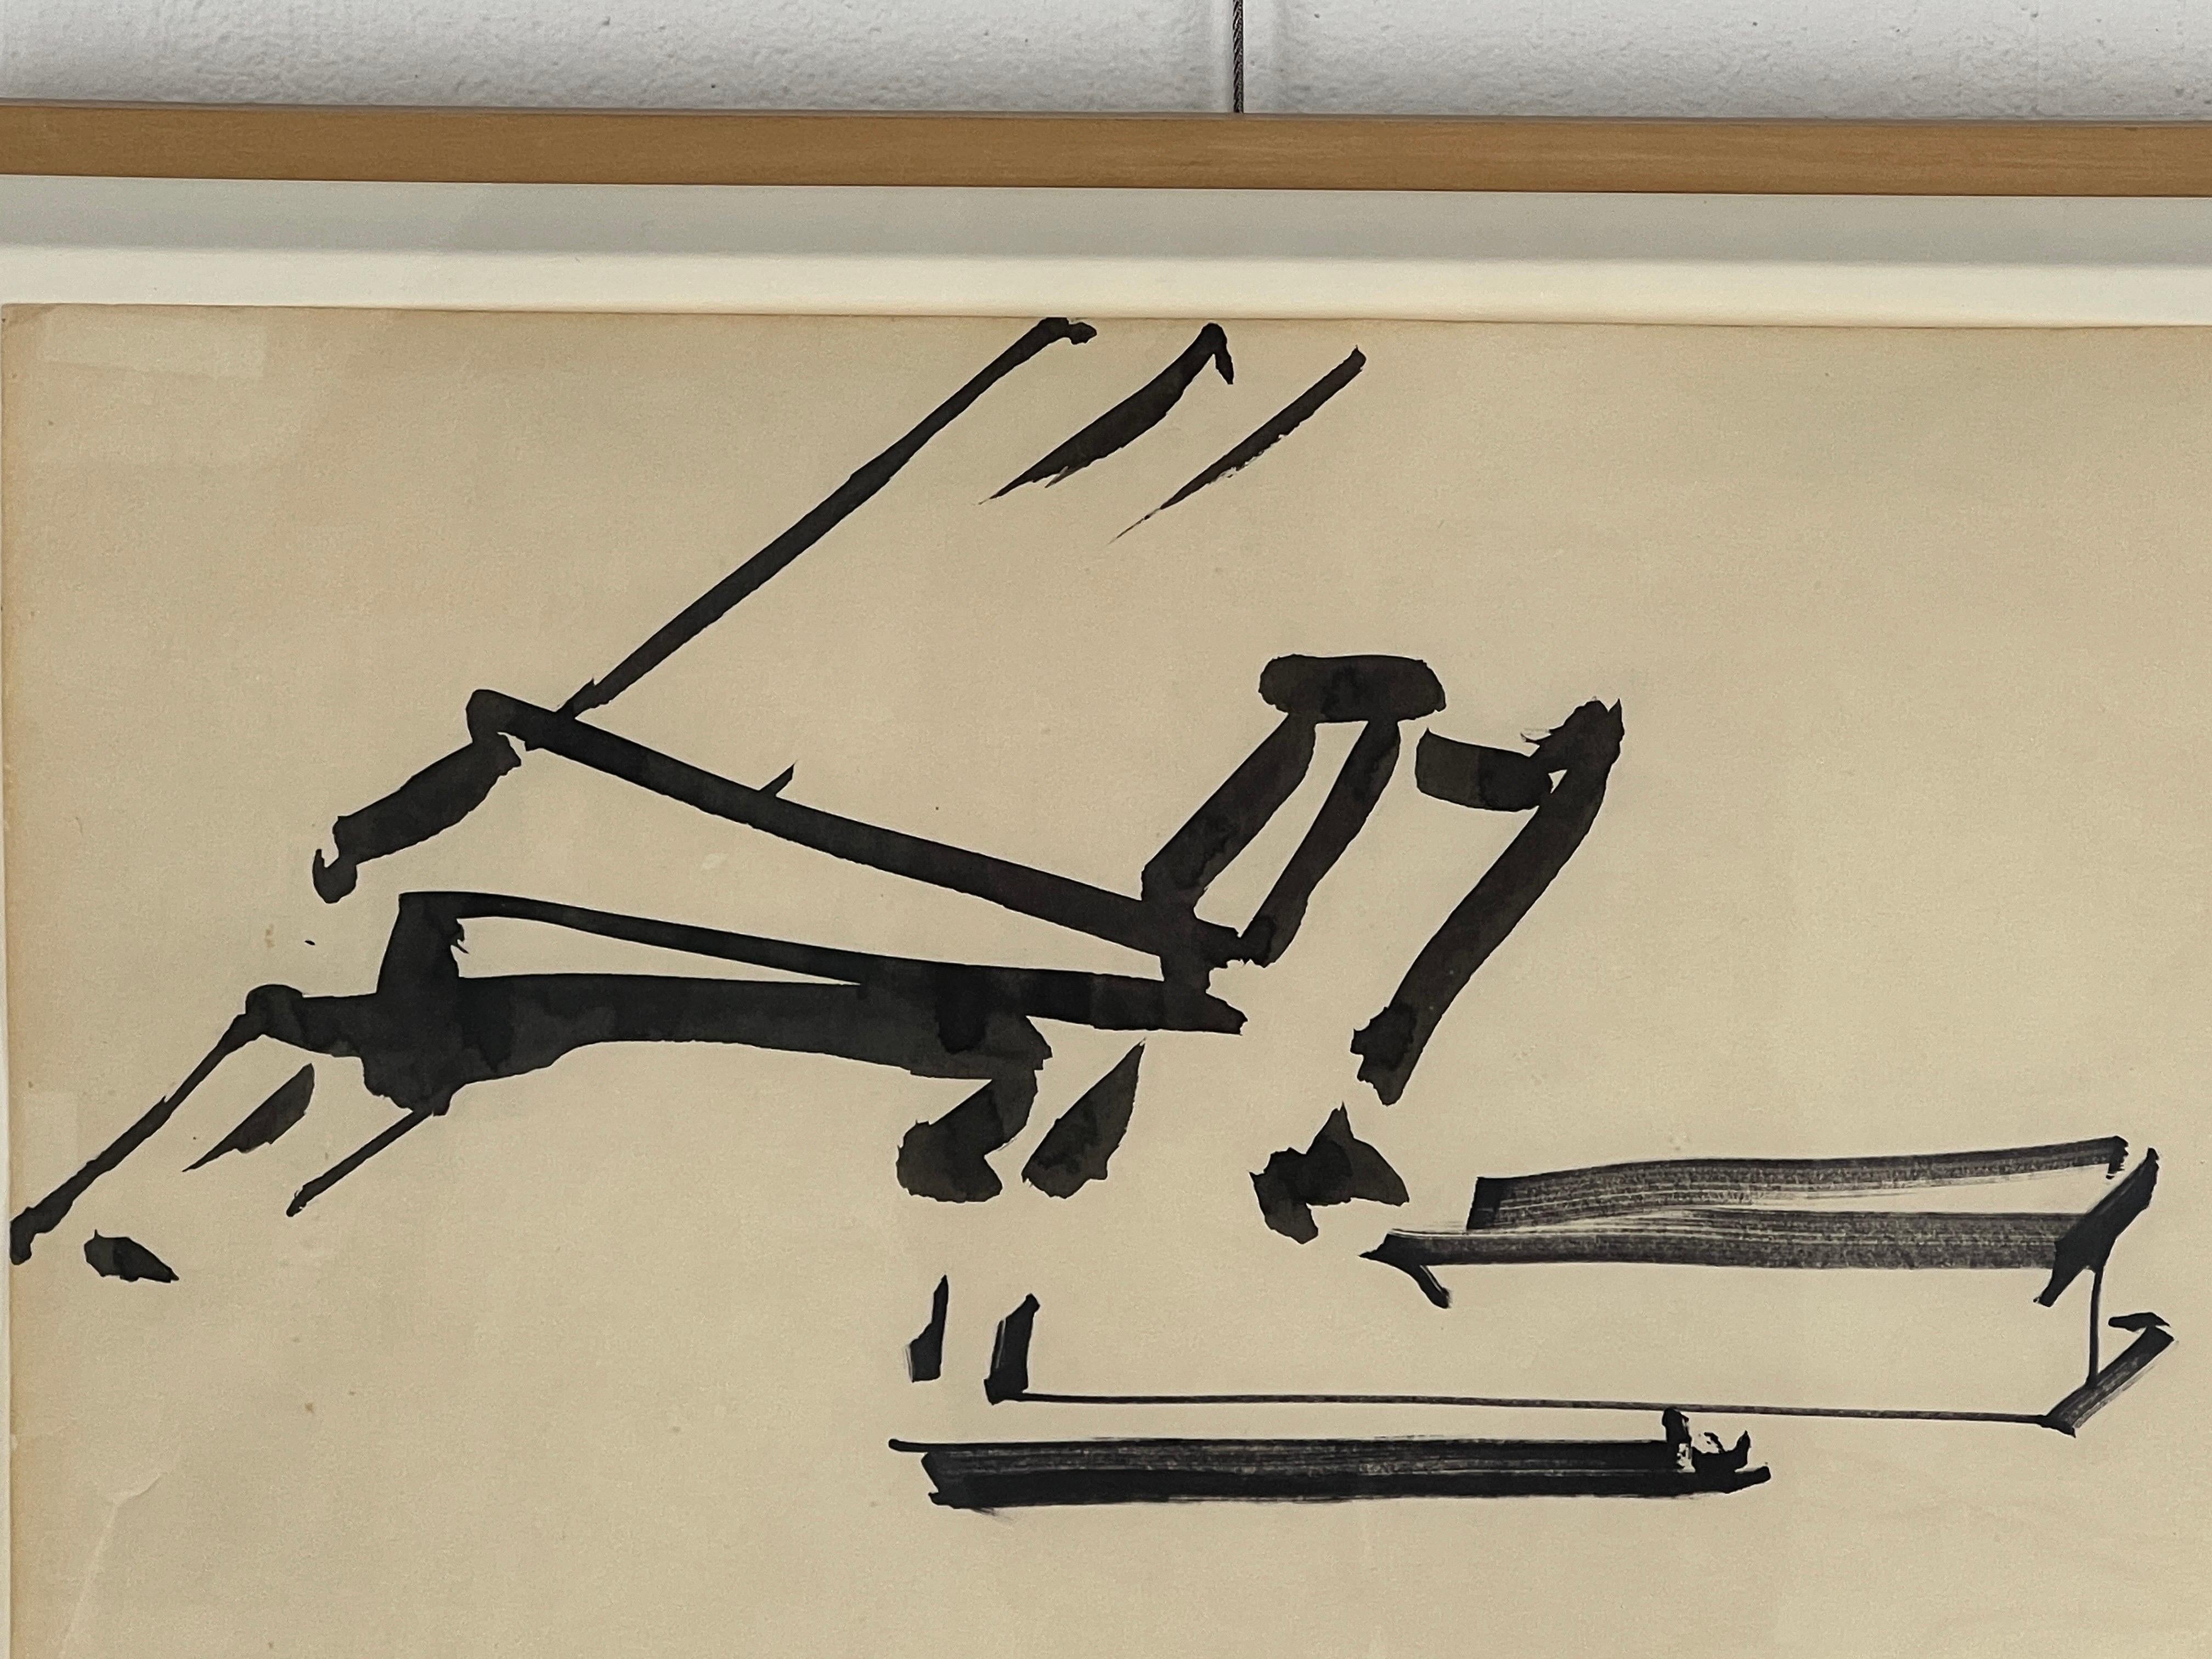 American Untitled Ink Drawing on Paper, 1974, by Mark di Suvero  For Sale